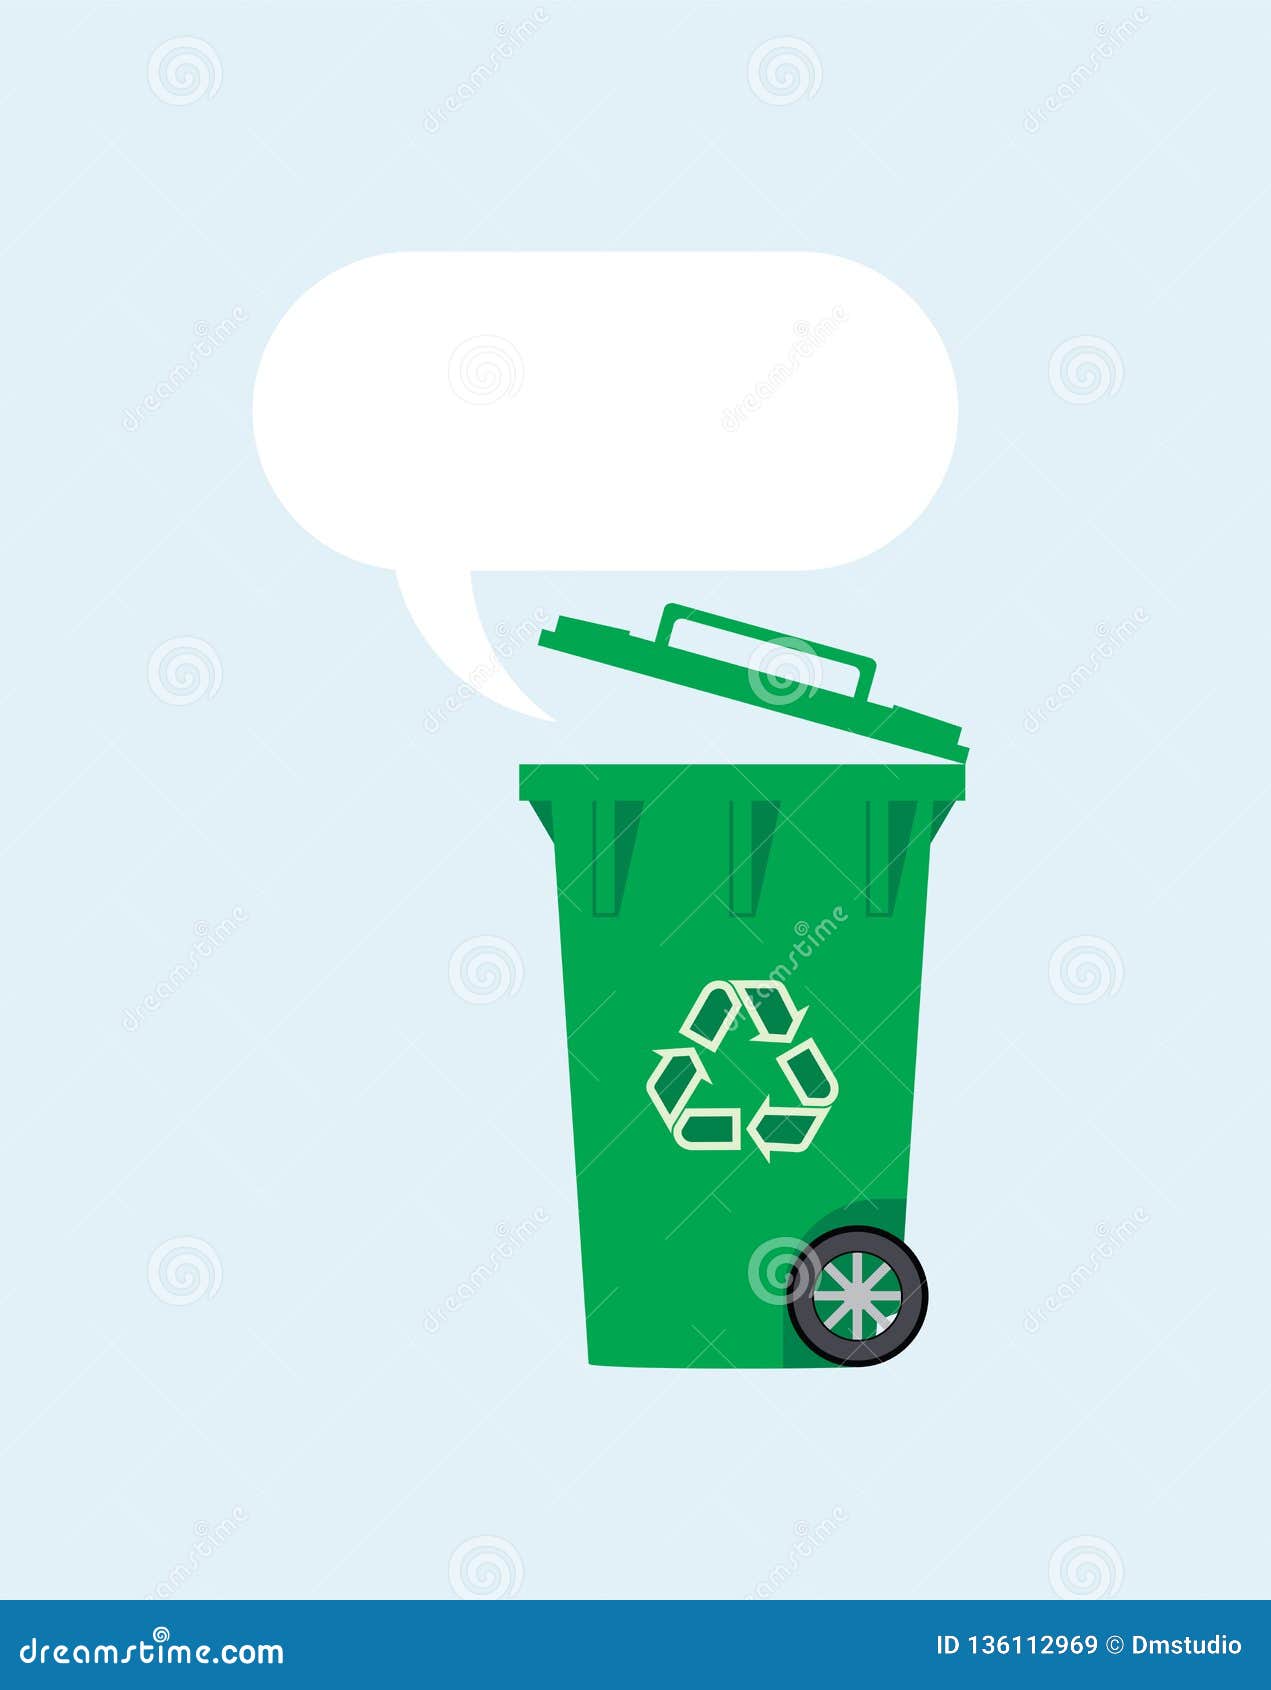 Vector Flat Recycling Wheelie Bin Stock Vector - Illustration of pollution,  container: 136112969